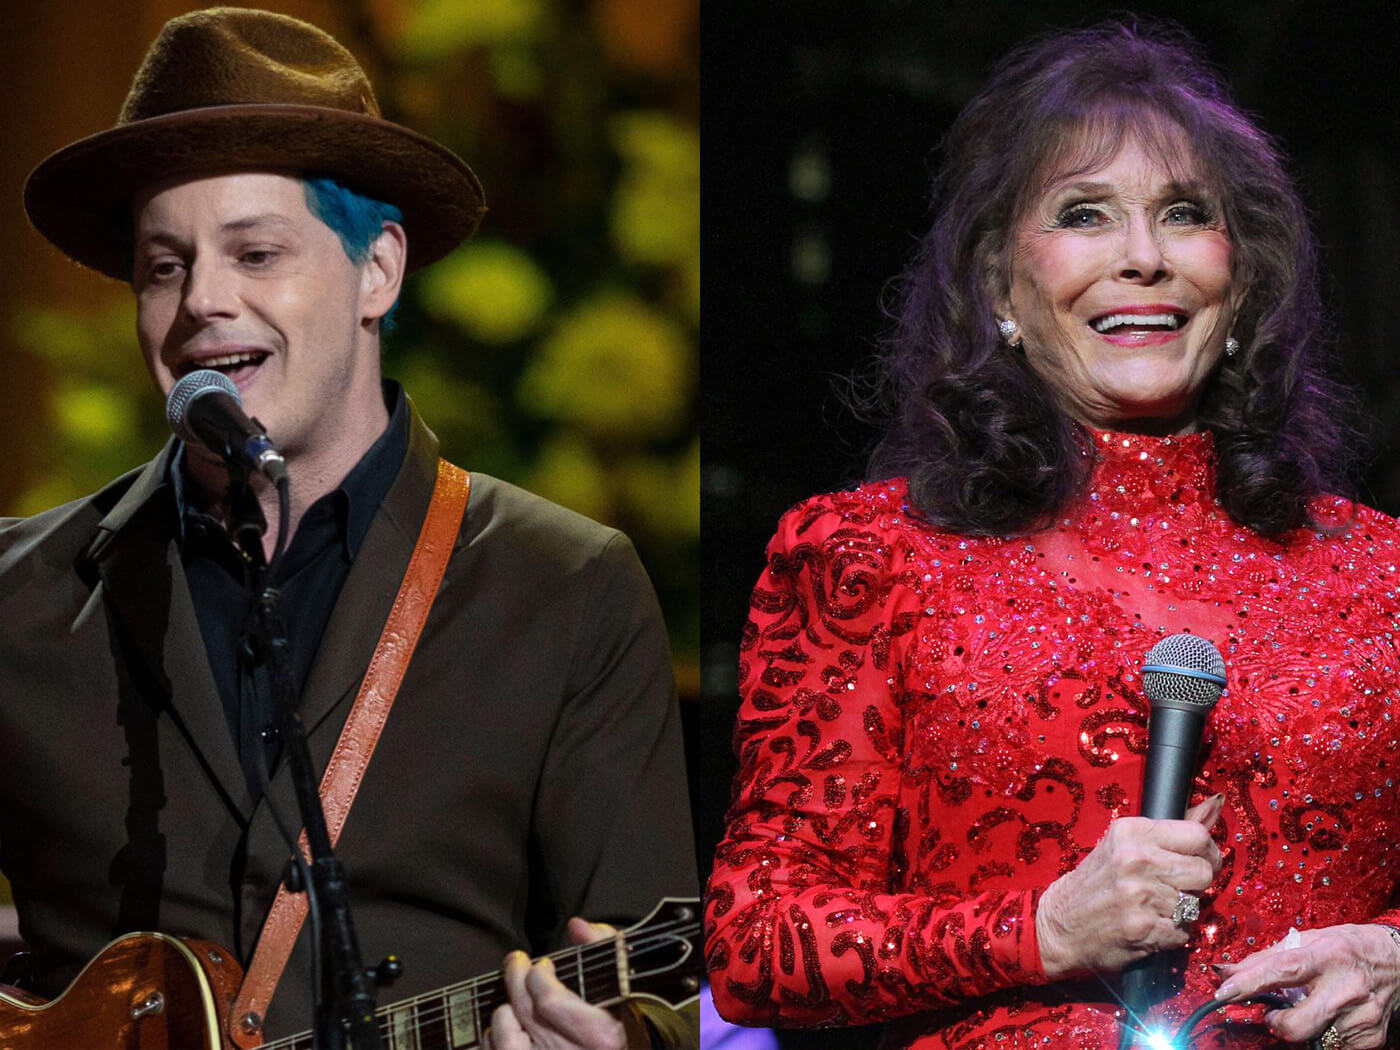 Jack White delivers surprise cover of “Van Lear Rose” at Loretta Lynn tribute show